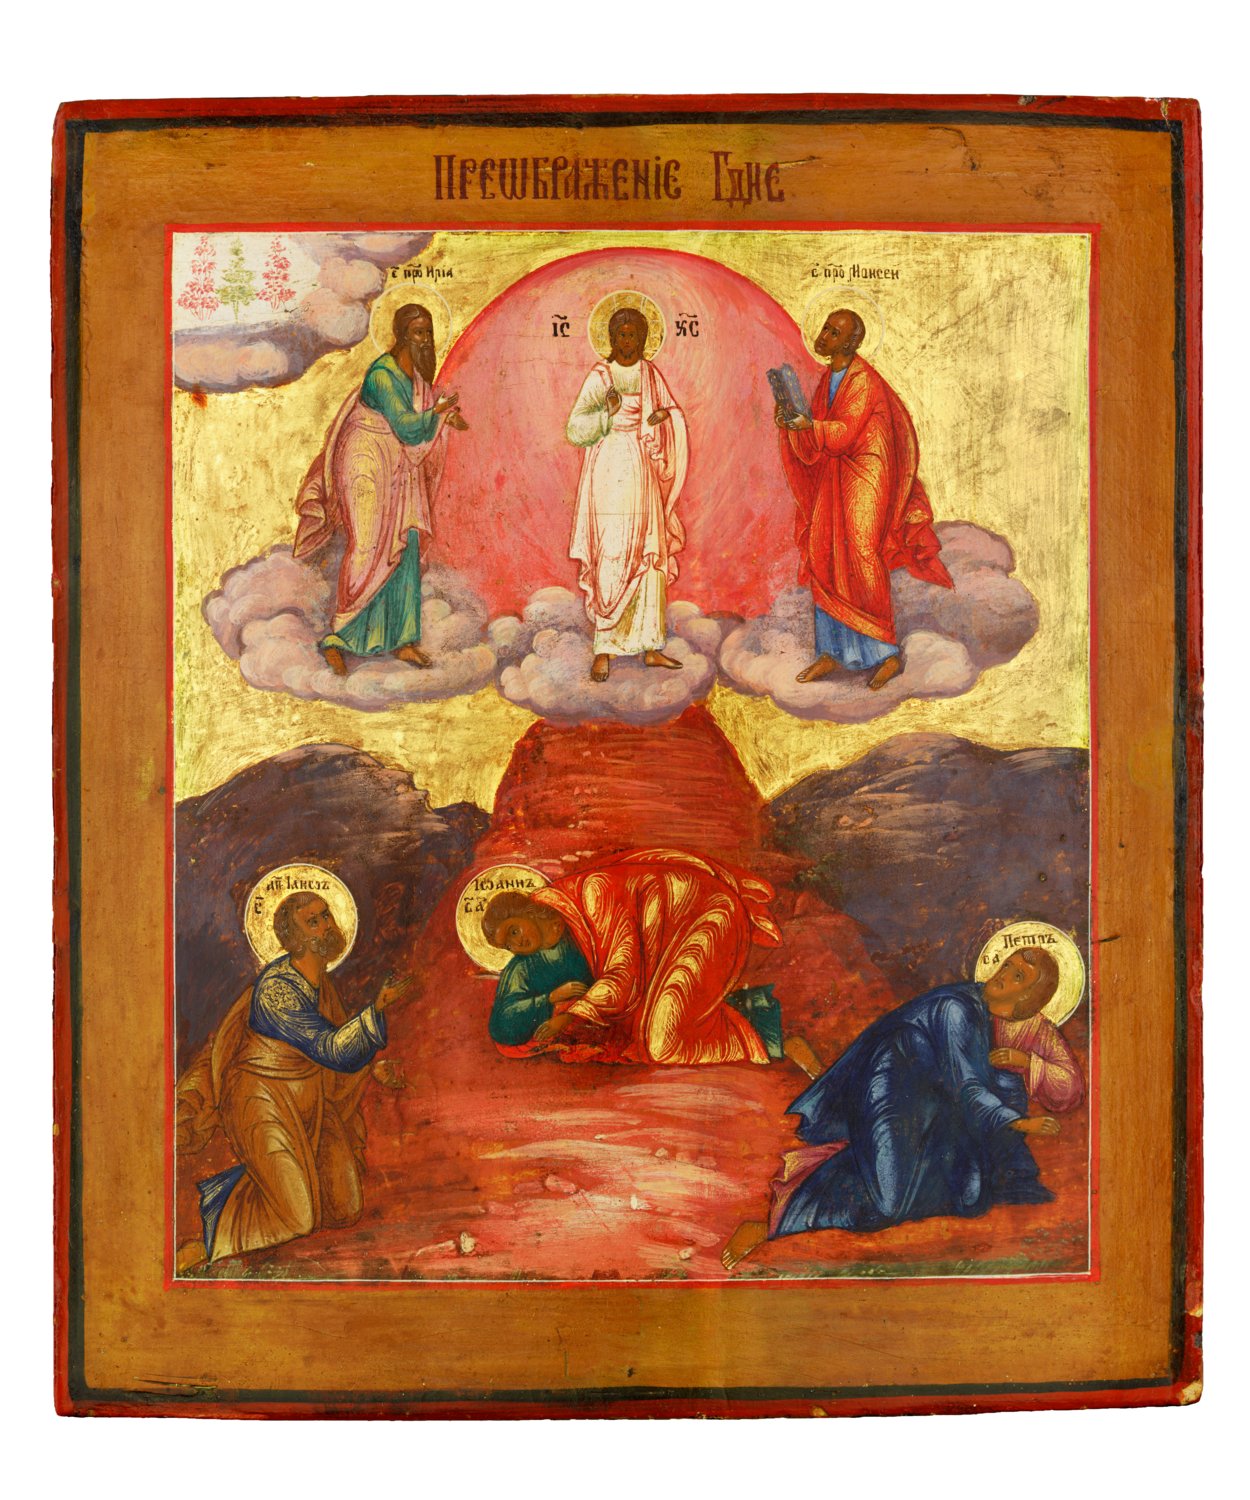 The Transfiguration of Christ, circa 1890, anonymous artist, egg tempera on wood, 14 inches x 12.25 inches x 1.5 inches.